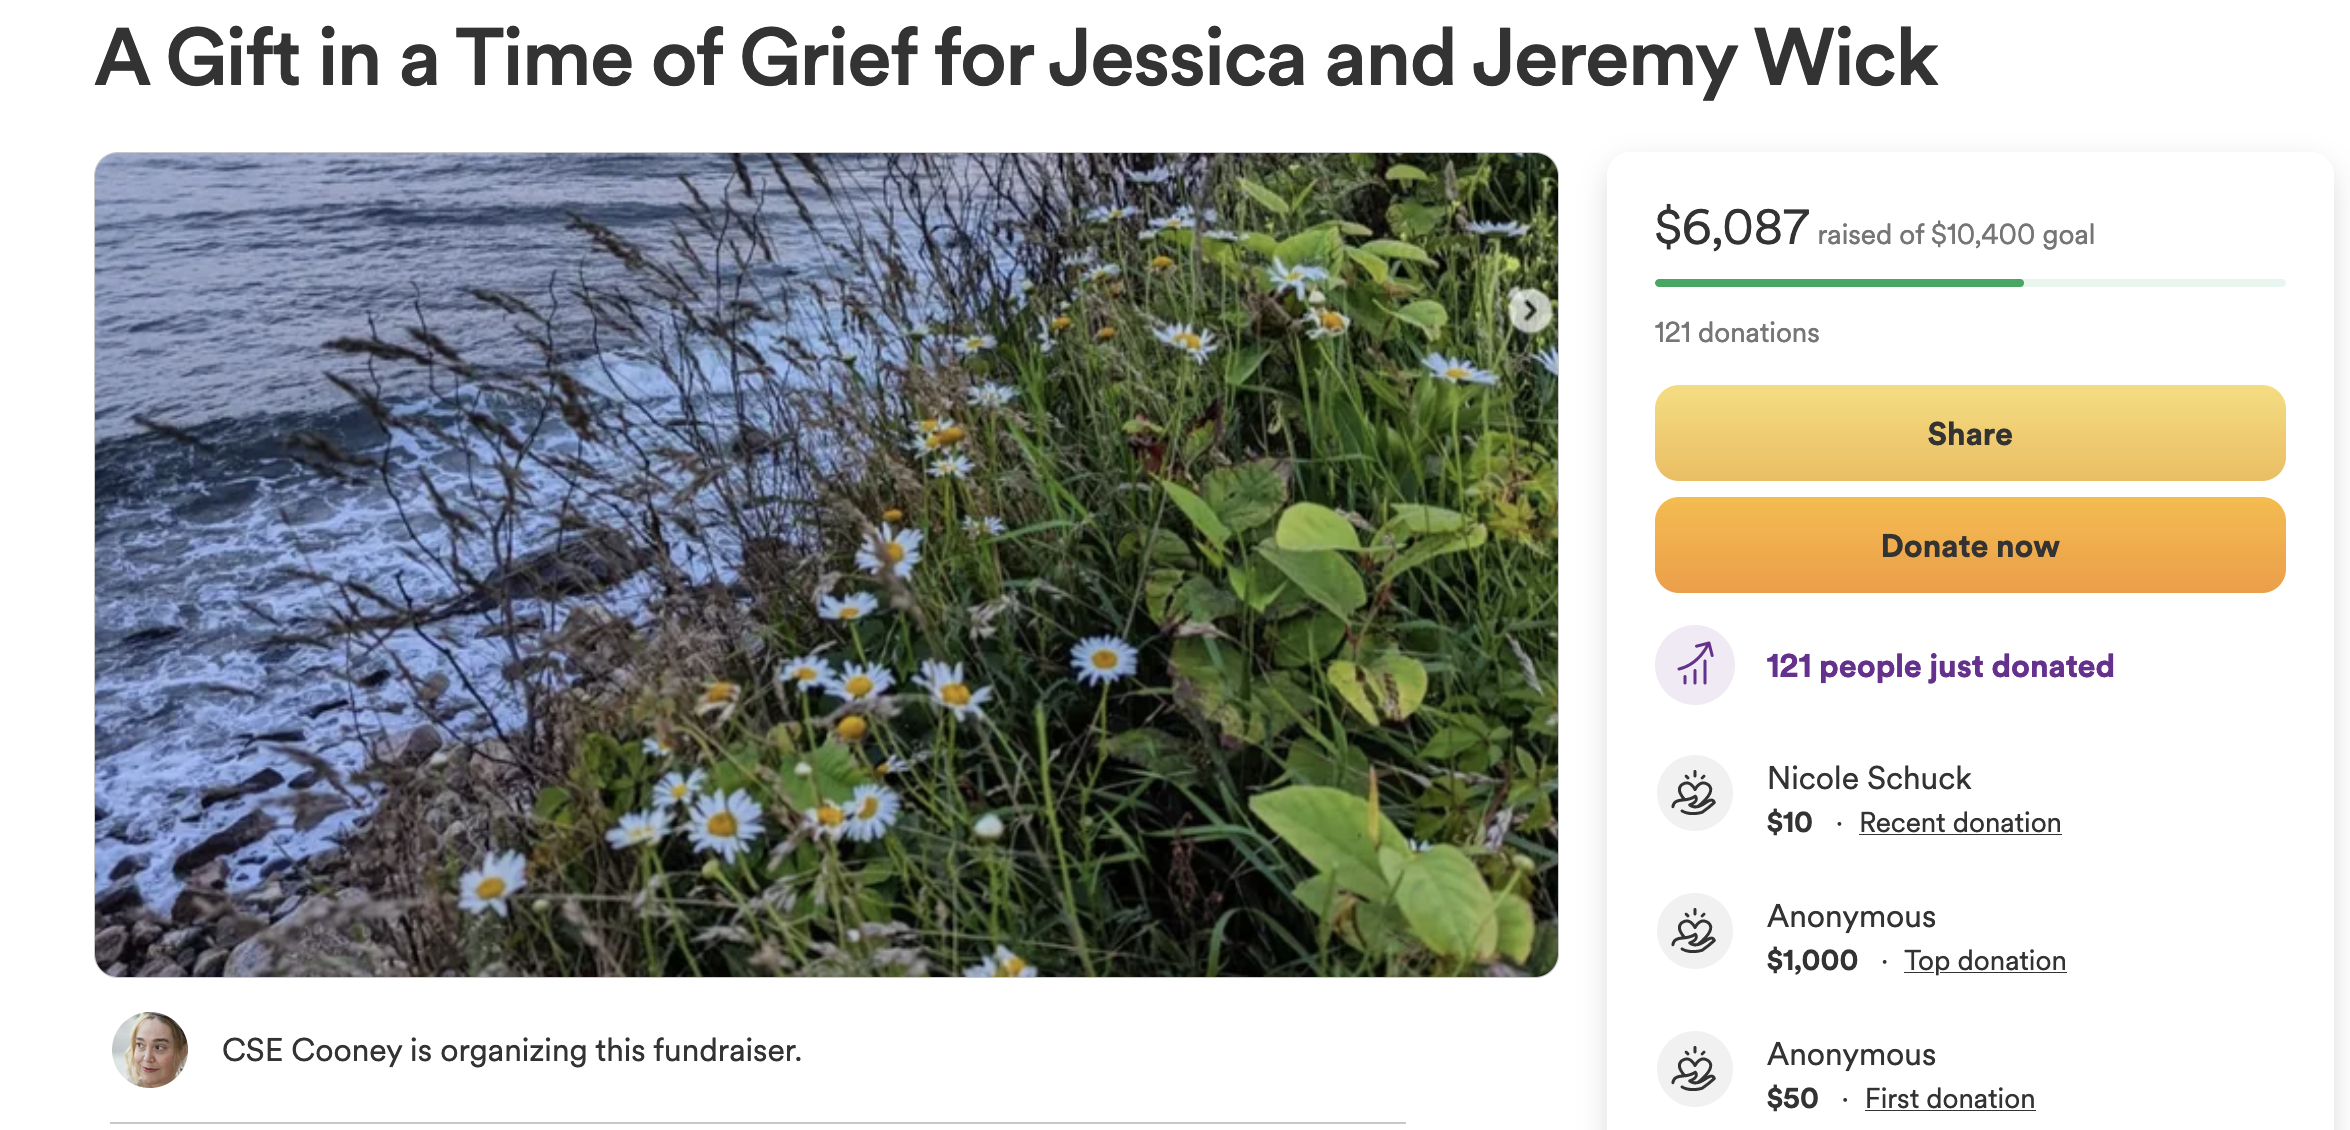 Screenshot of the fundraiser for Jessica and Jeremy Wick showing 121 donations totaling $6,087. The banner image is a landscape photo or grasses and flowers along a shoreline. 